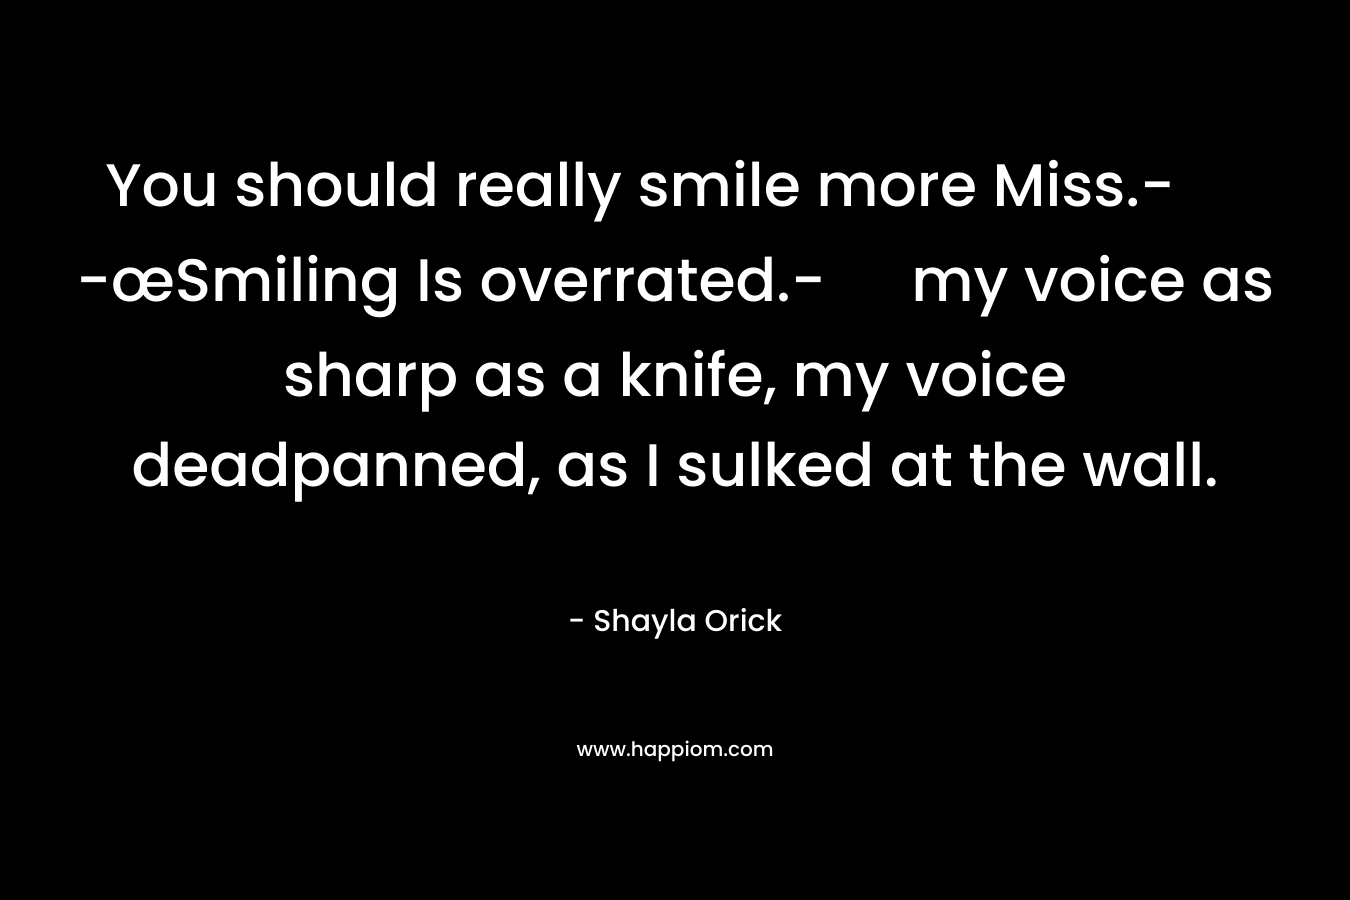 You should really smile more Miss.-  -œSmiling Is overrated.- my voice as sharp as a knife, my voice deadpanned, as I sulked at the wall.